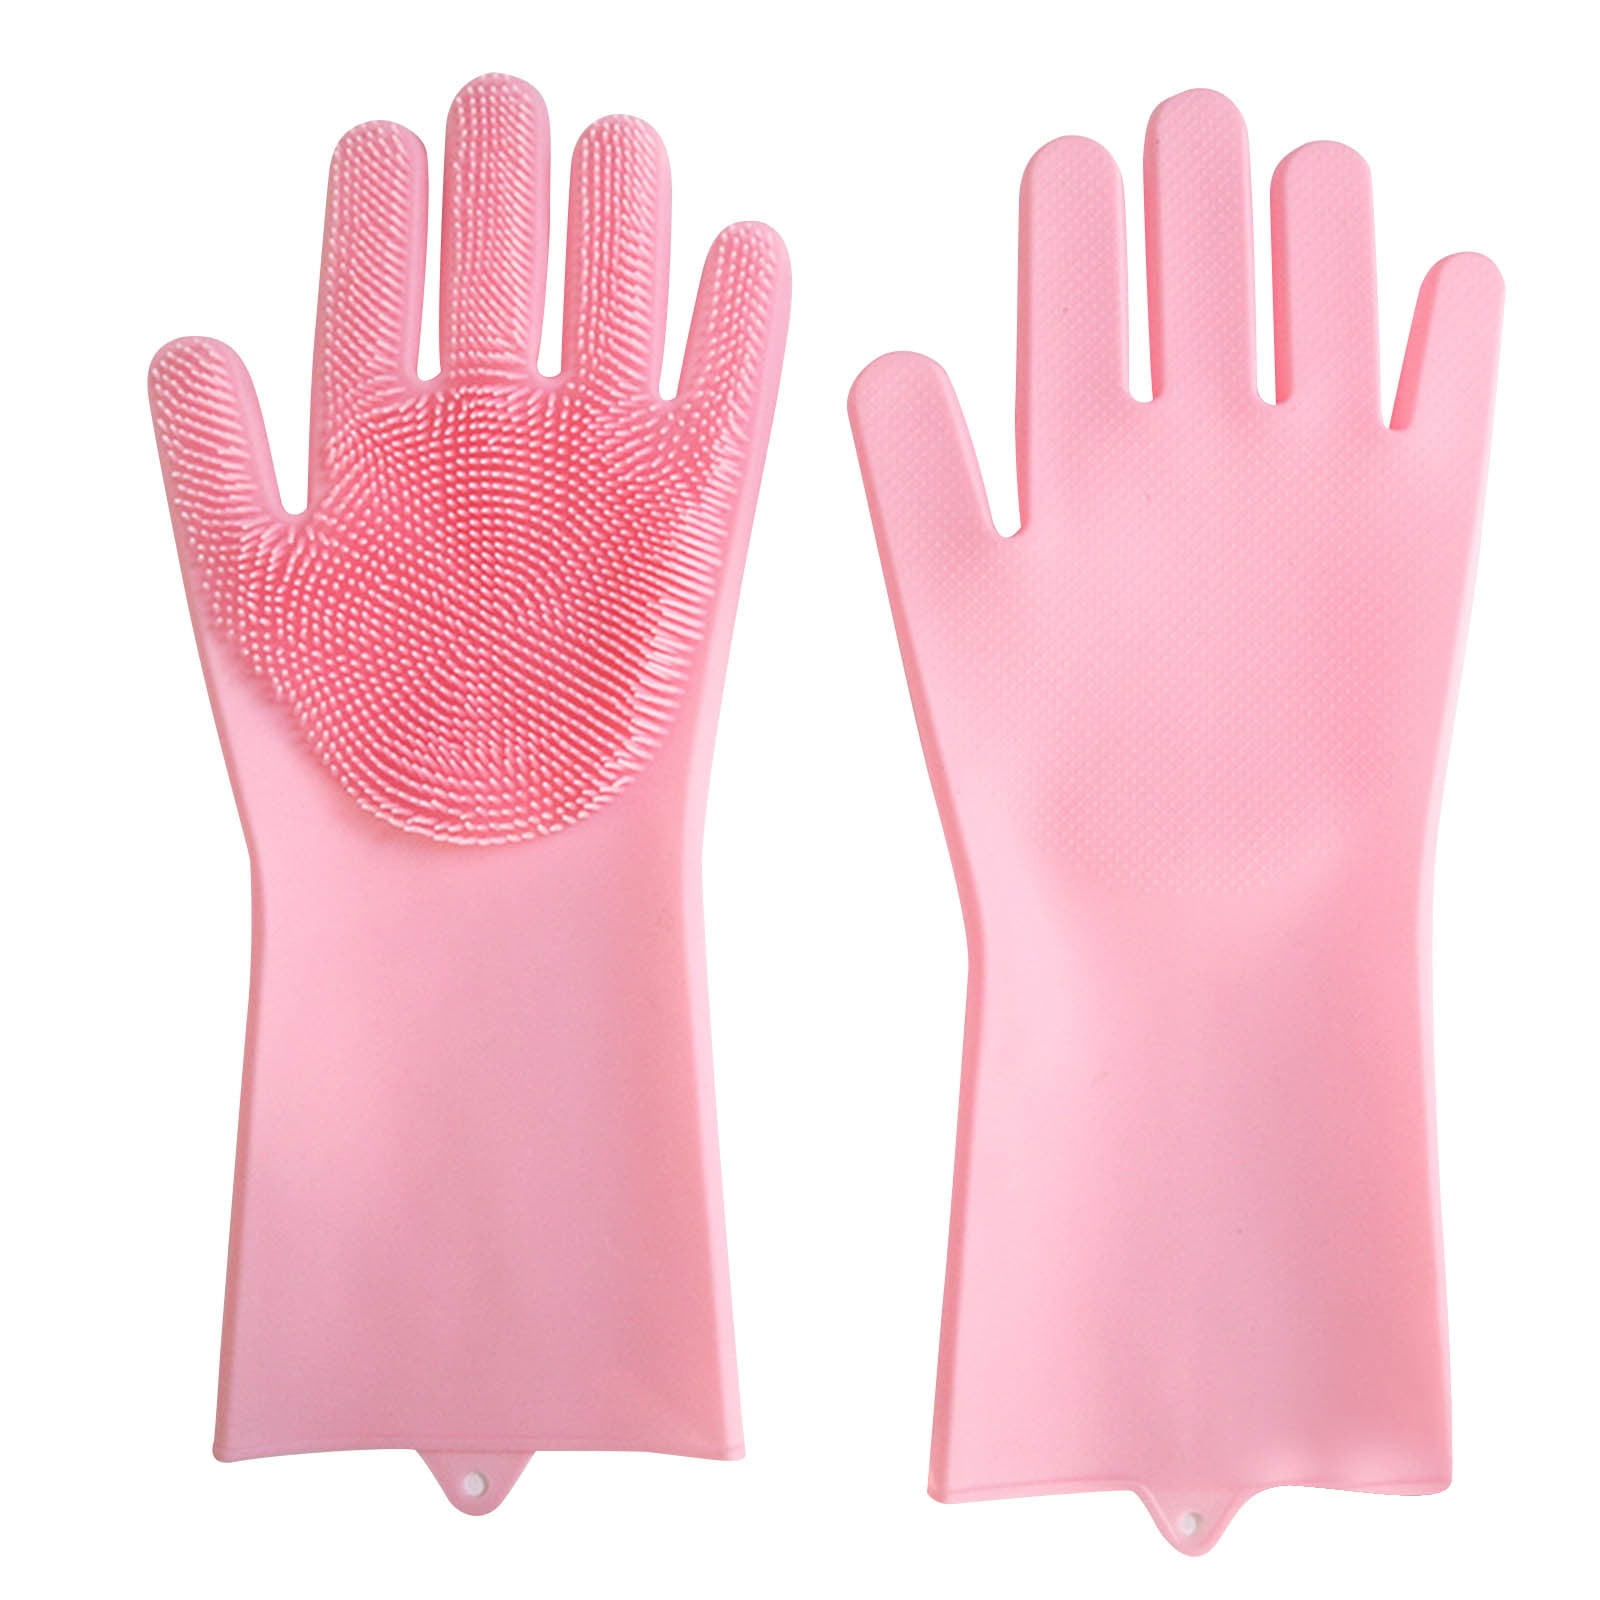 Details about   1 Pair Silicone Dishwashing Scrubber Gloves For Cleaning with 2 Sponges Brushes 